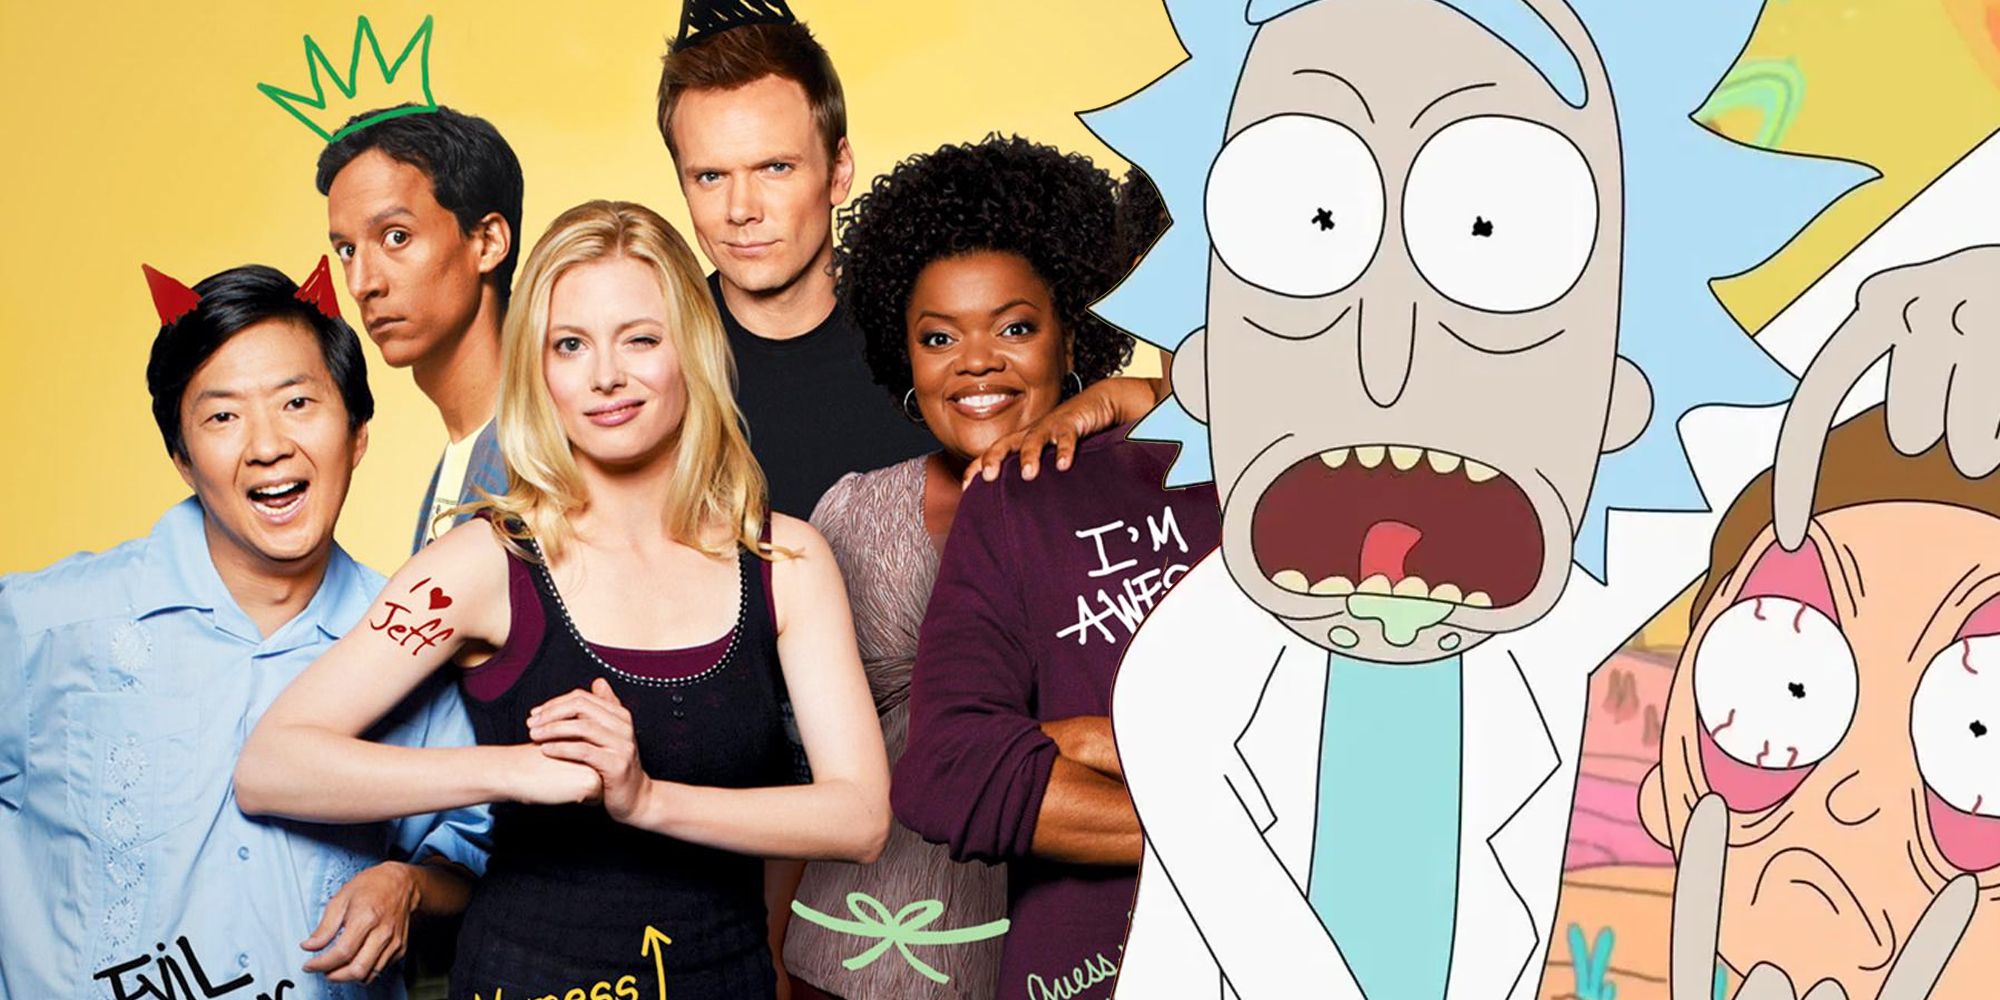 Rick and Morty and the cast of Community